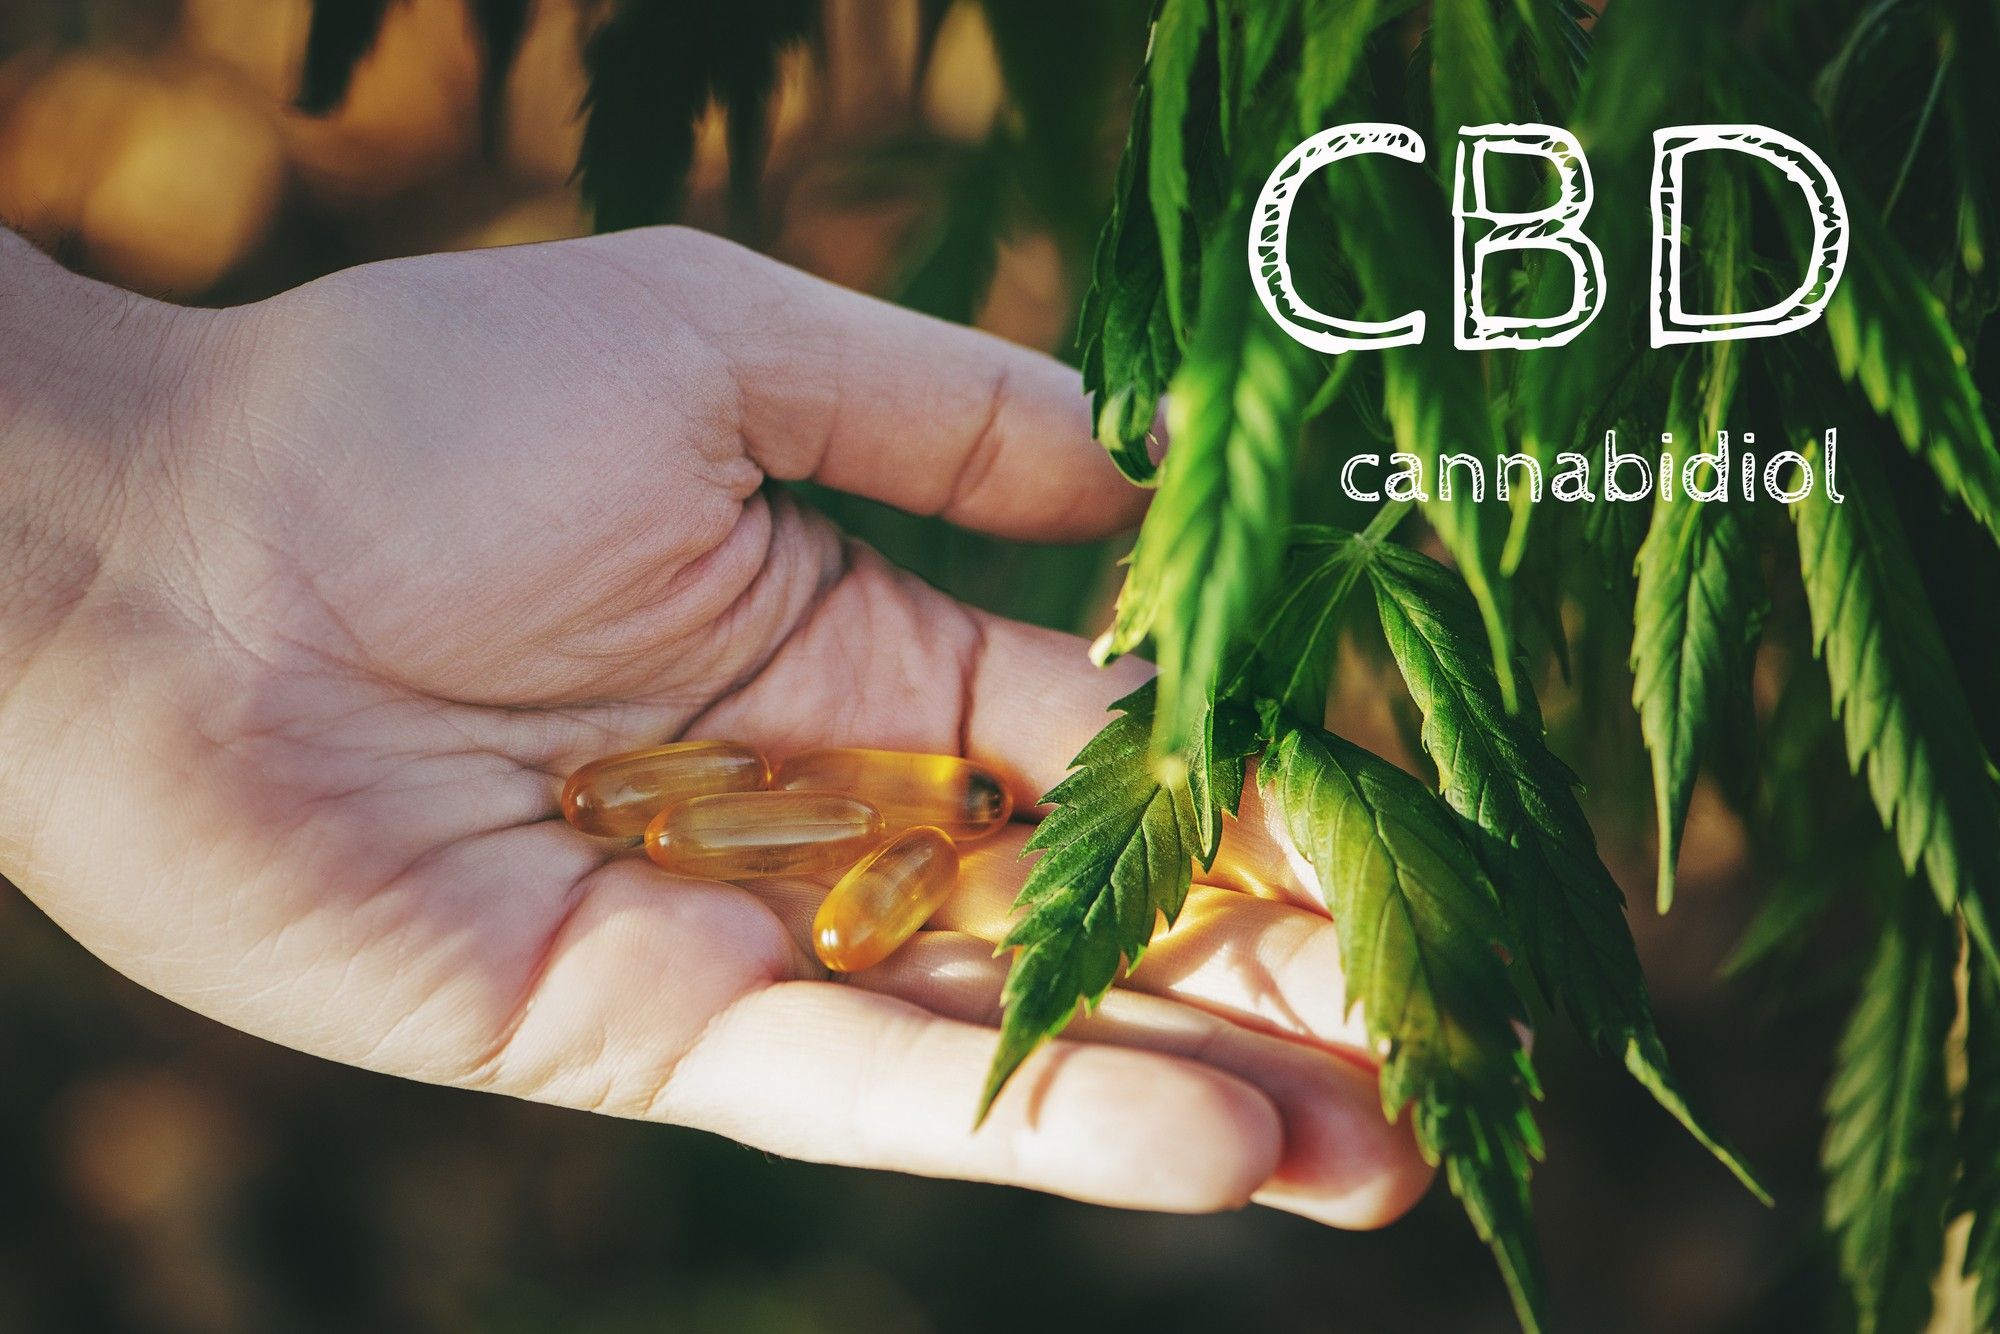 Just Brands CBD products may be mislabeled.